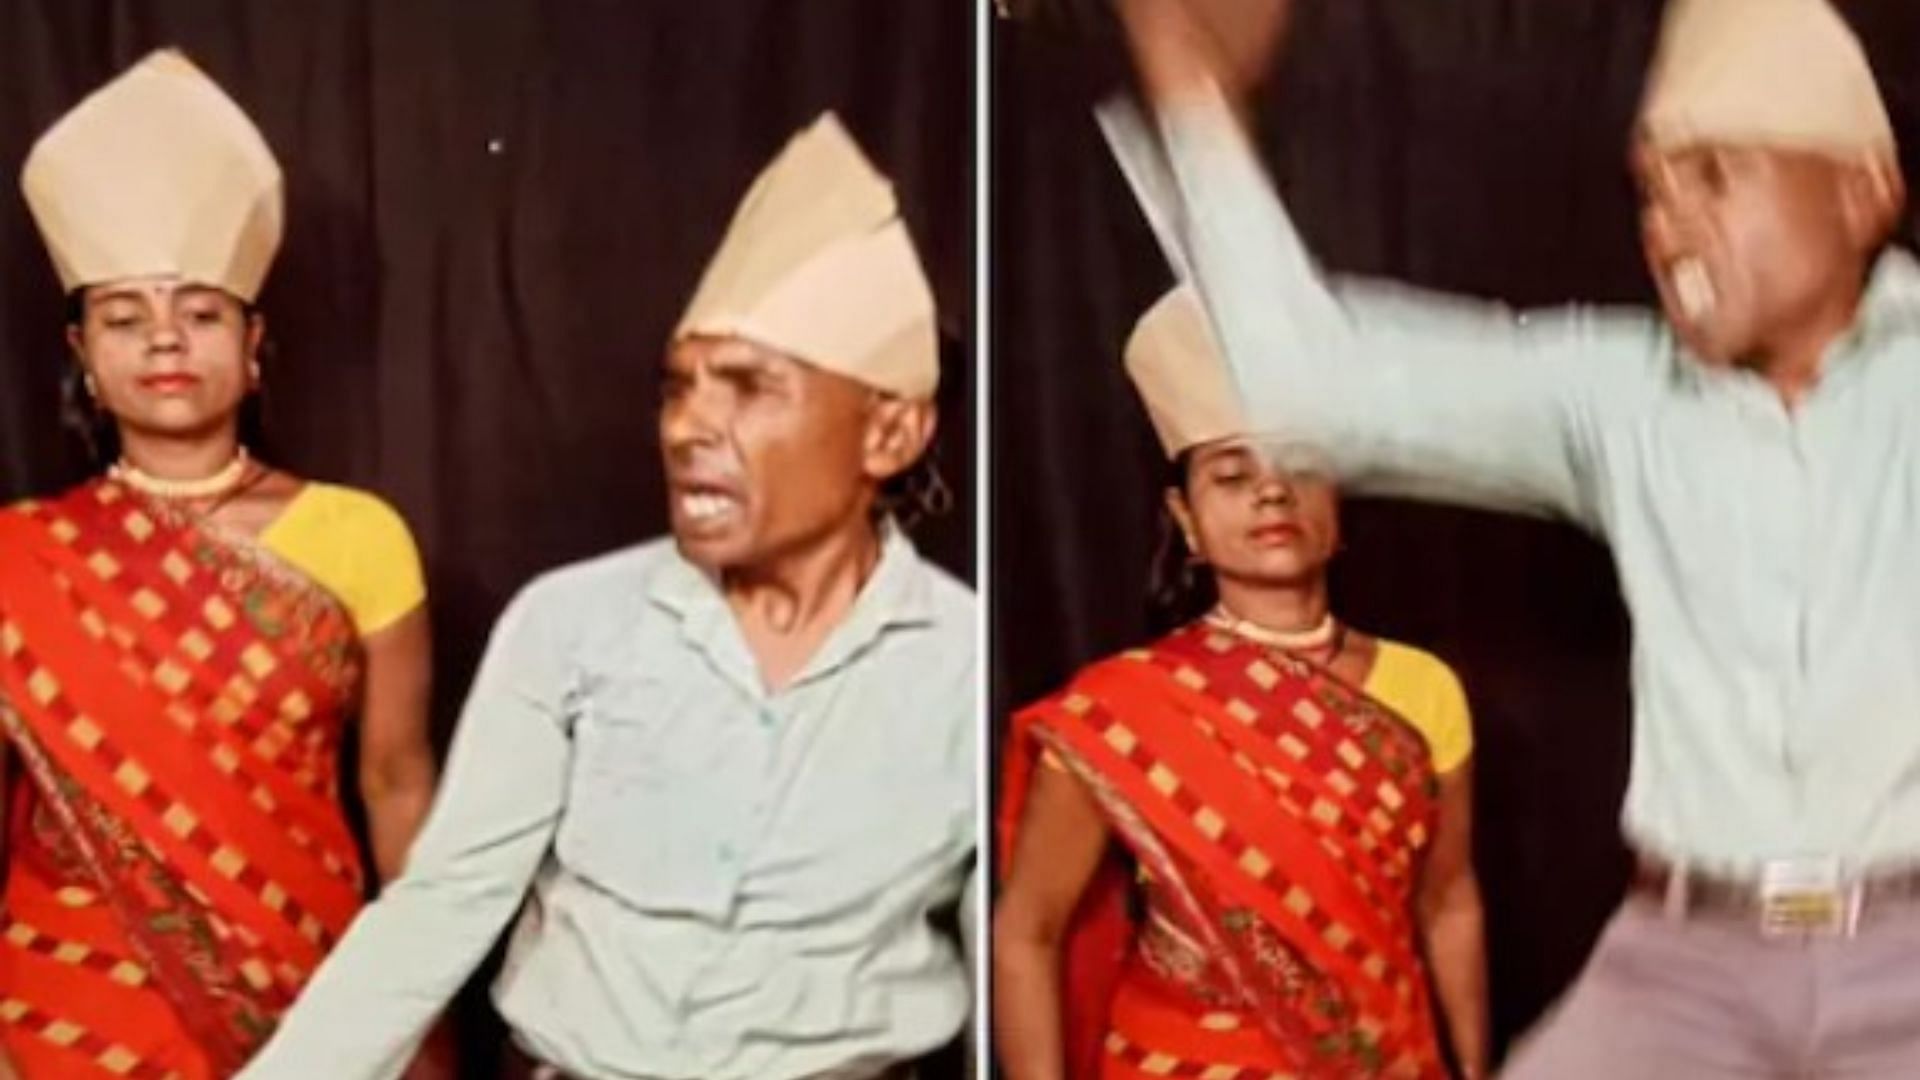 Husband wife did an hilarious dance wearing crowns funny dance video viral